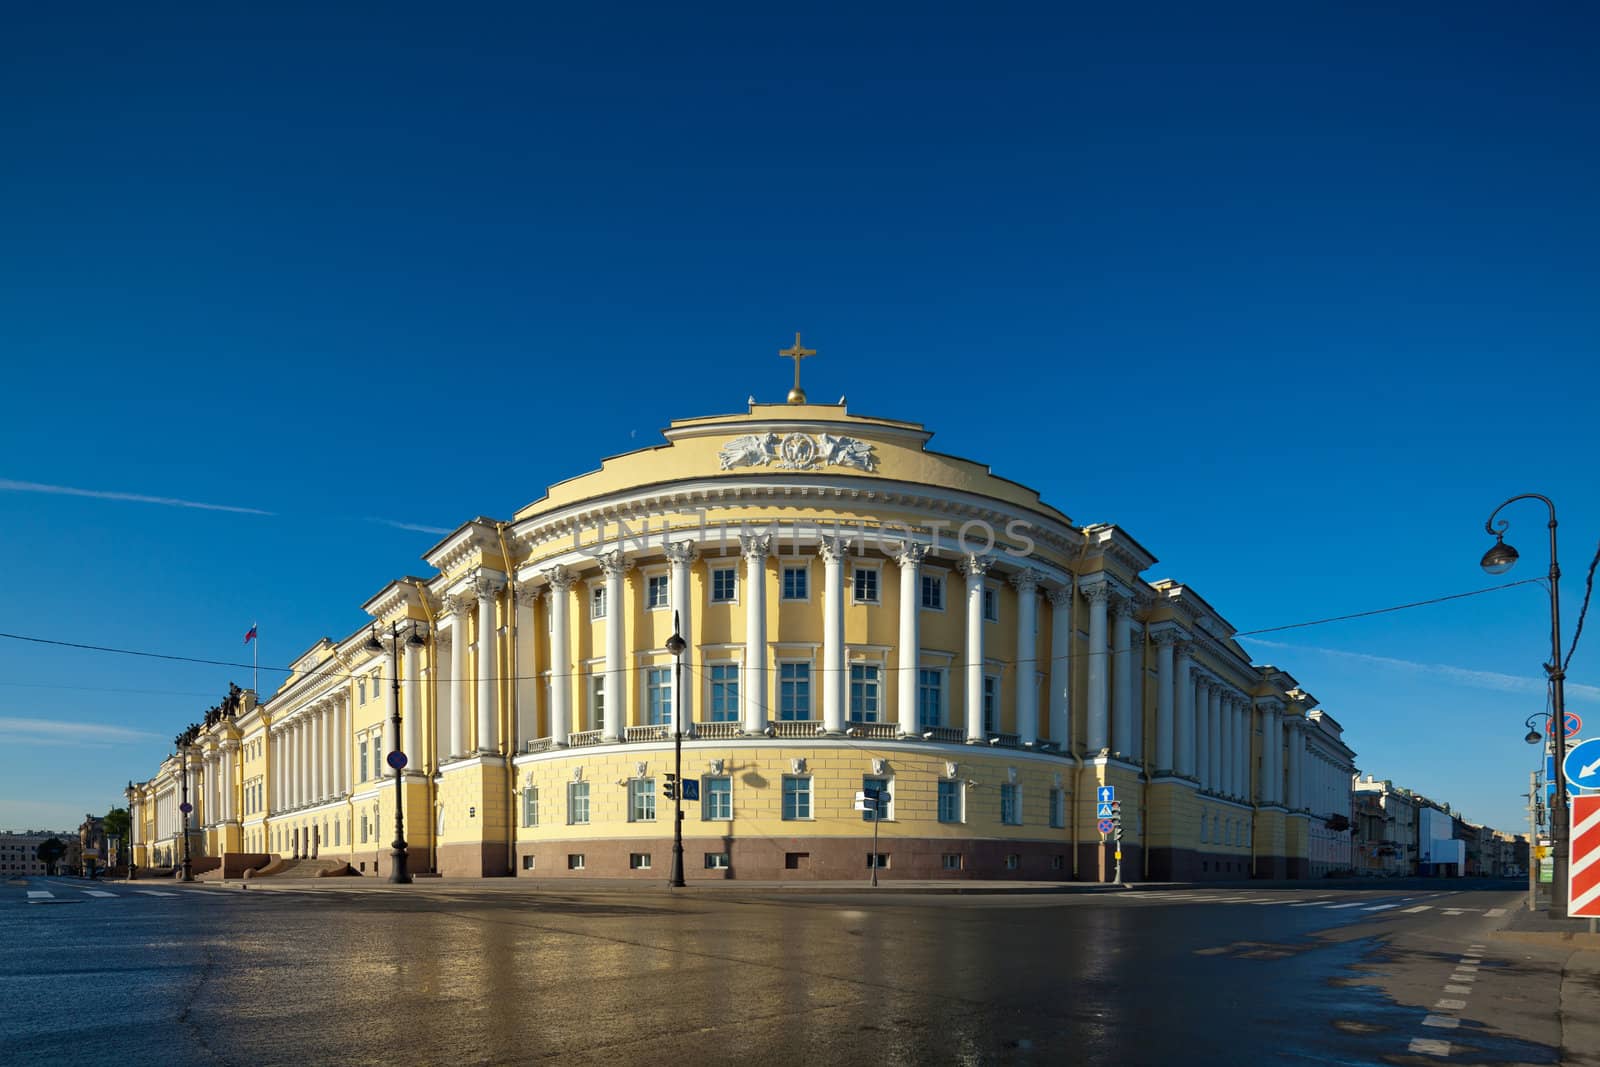 Senate and Synod building in St. Petersburg by Antartis